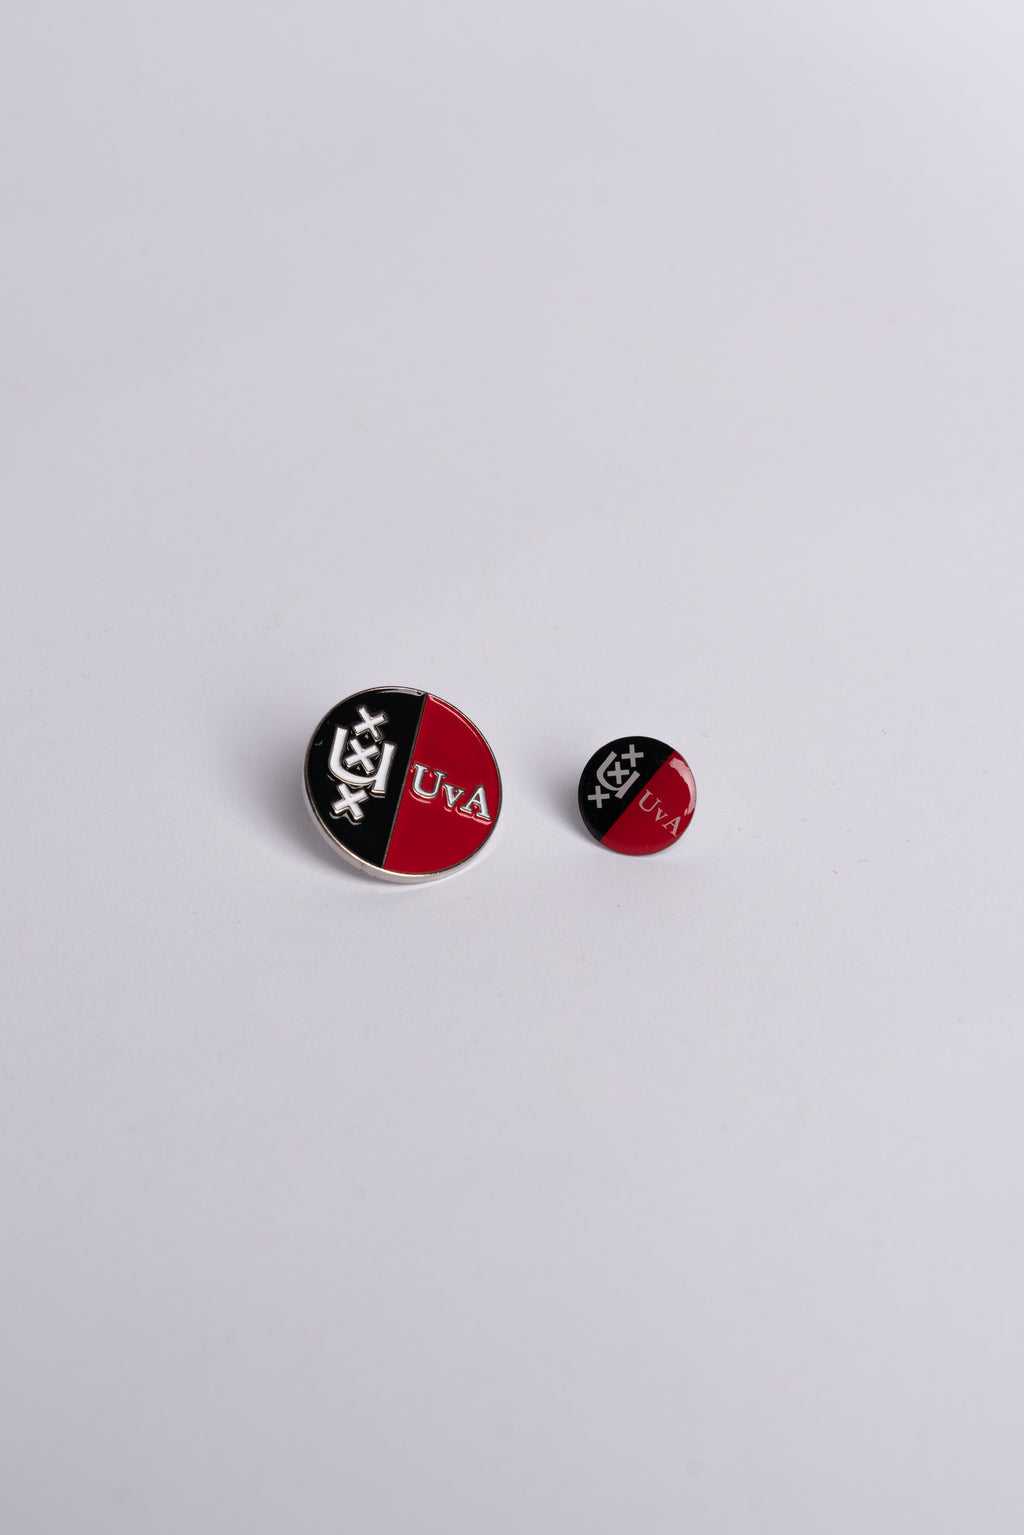 Pin University of Amsterdam in different sizes